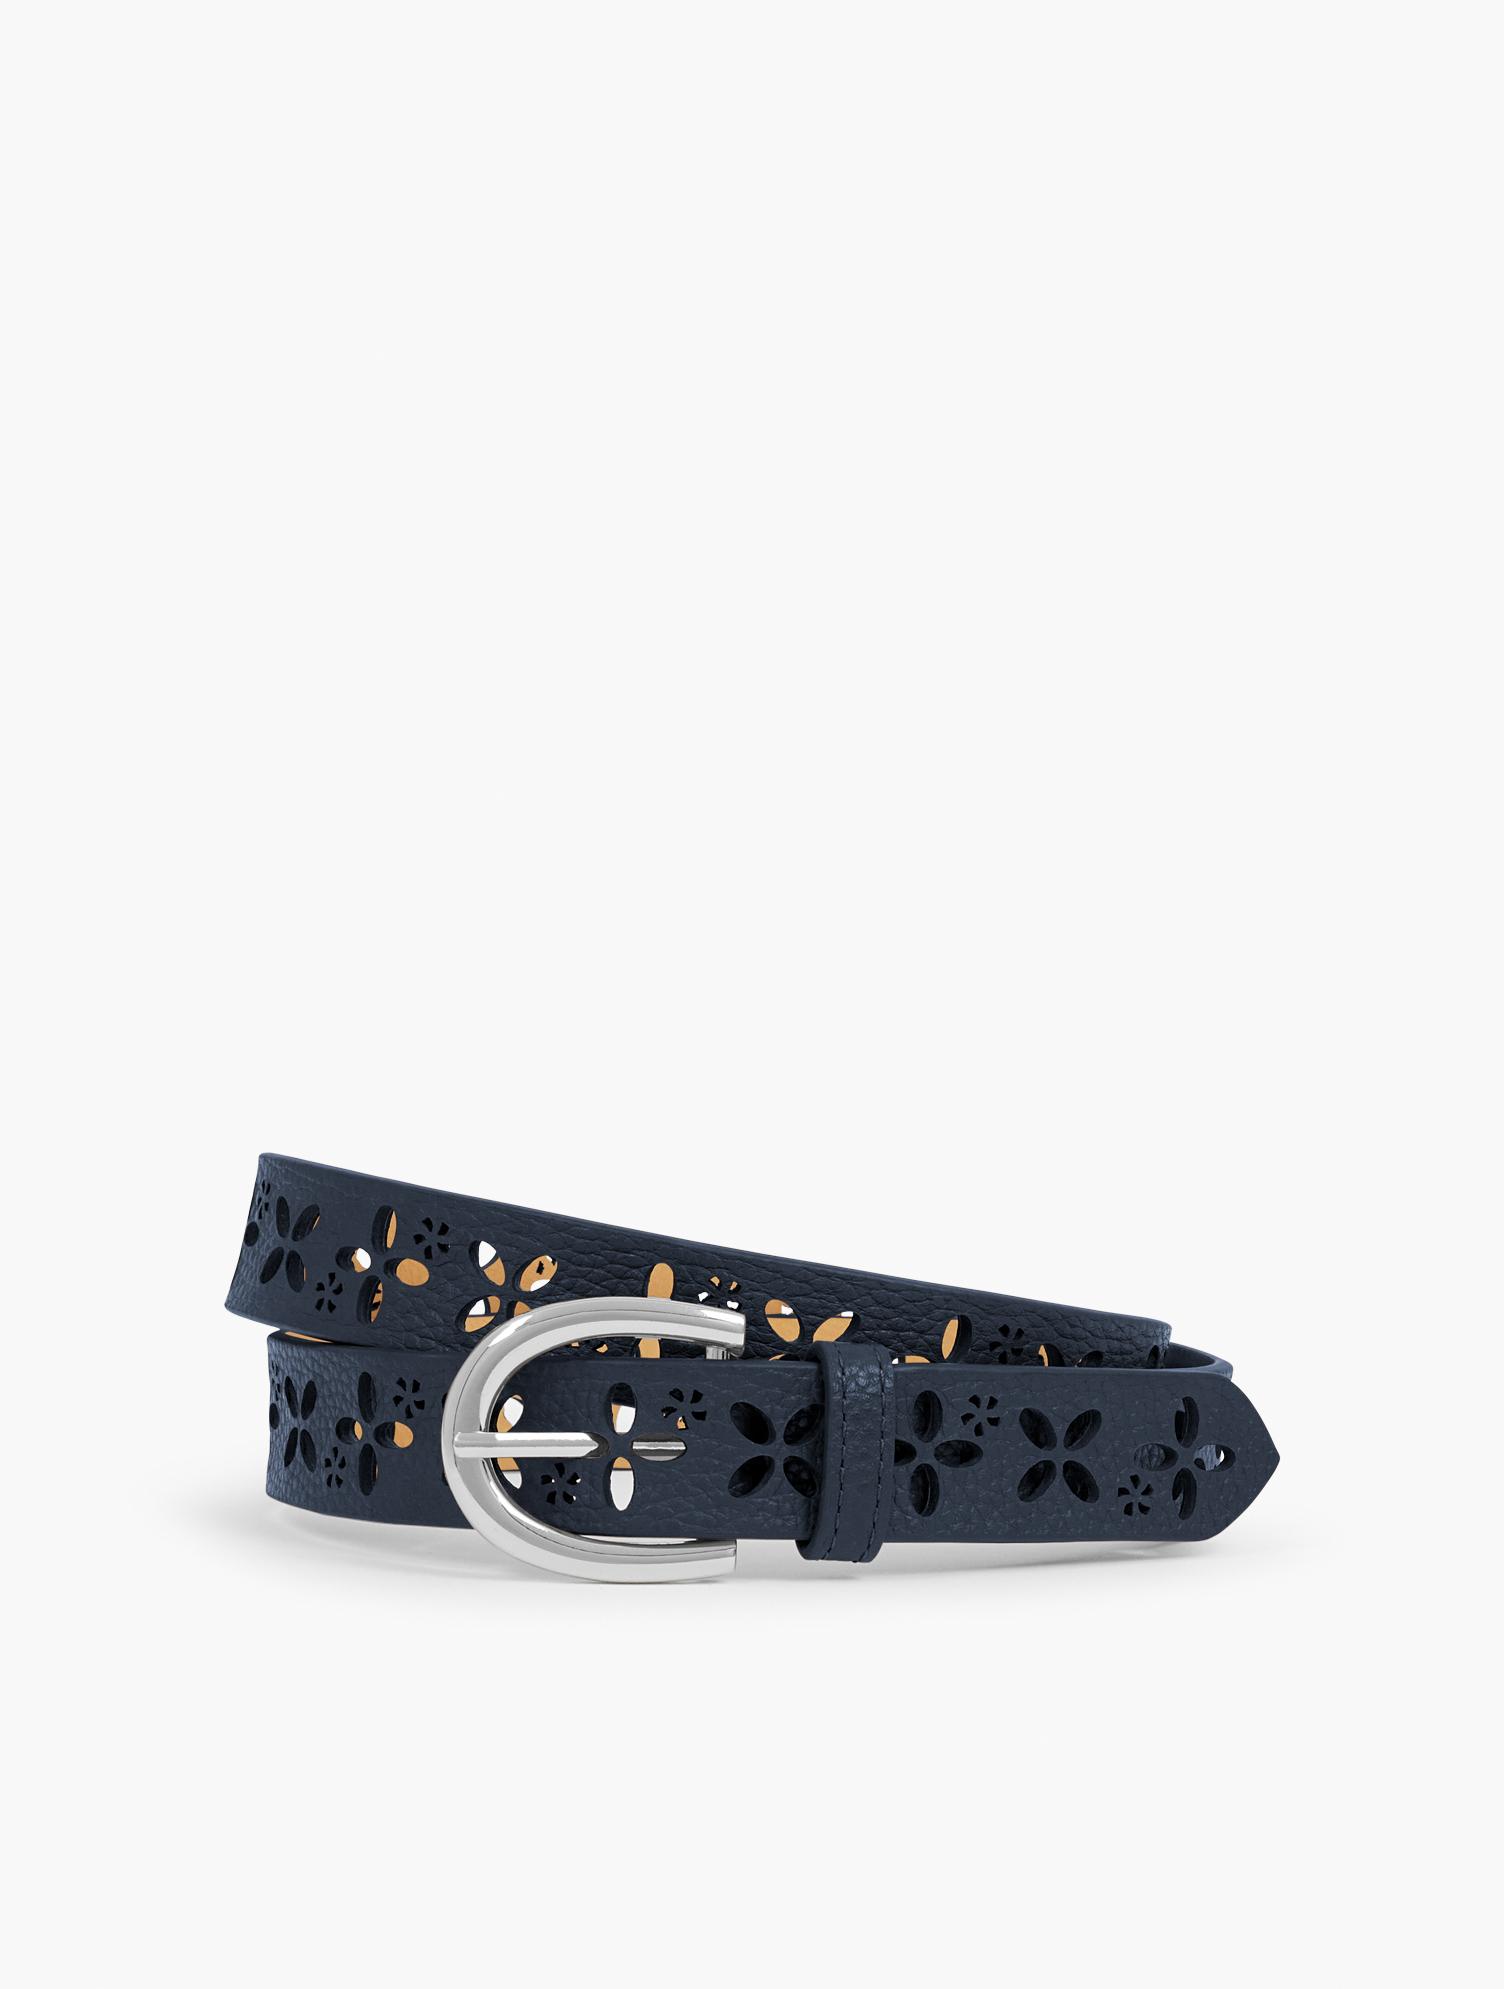 Talbots Perforated Floral Eyelet Leather Belt - Blue - Xs